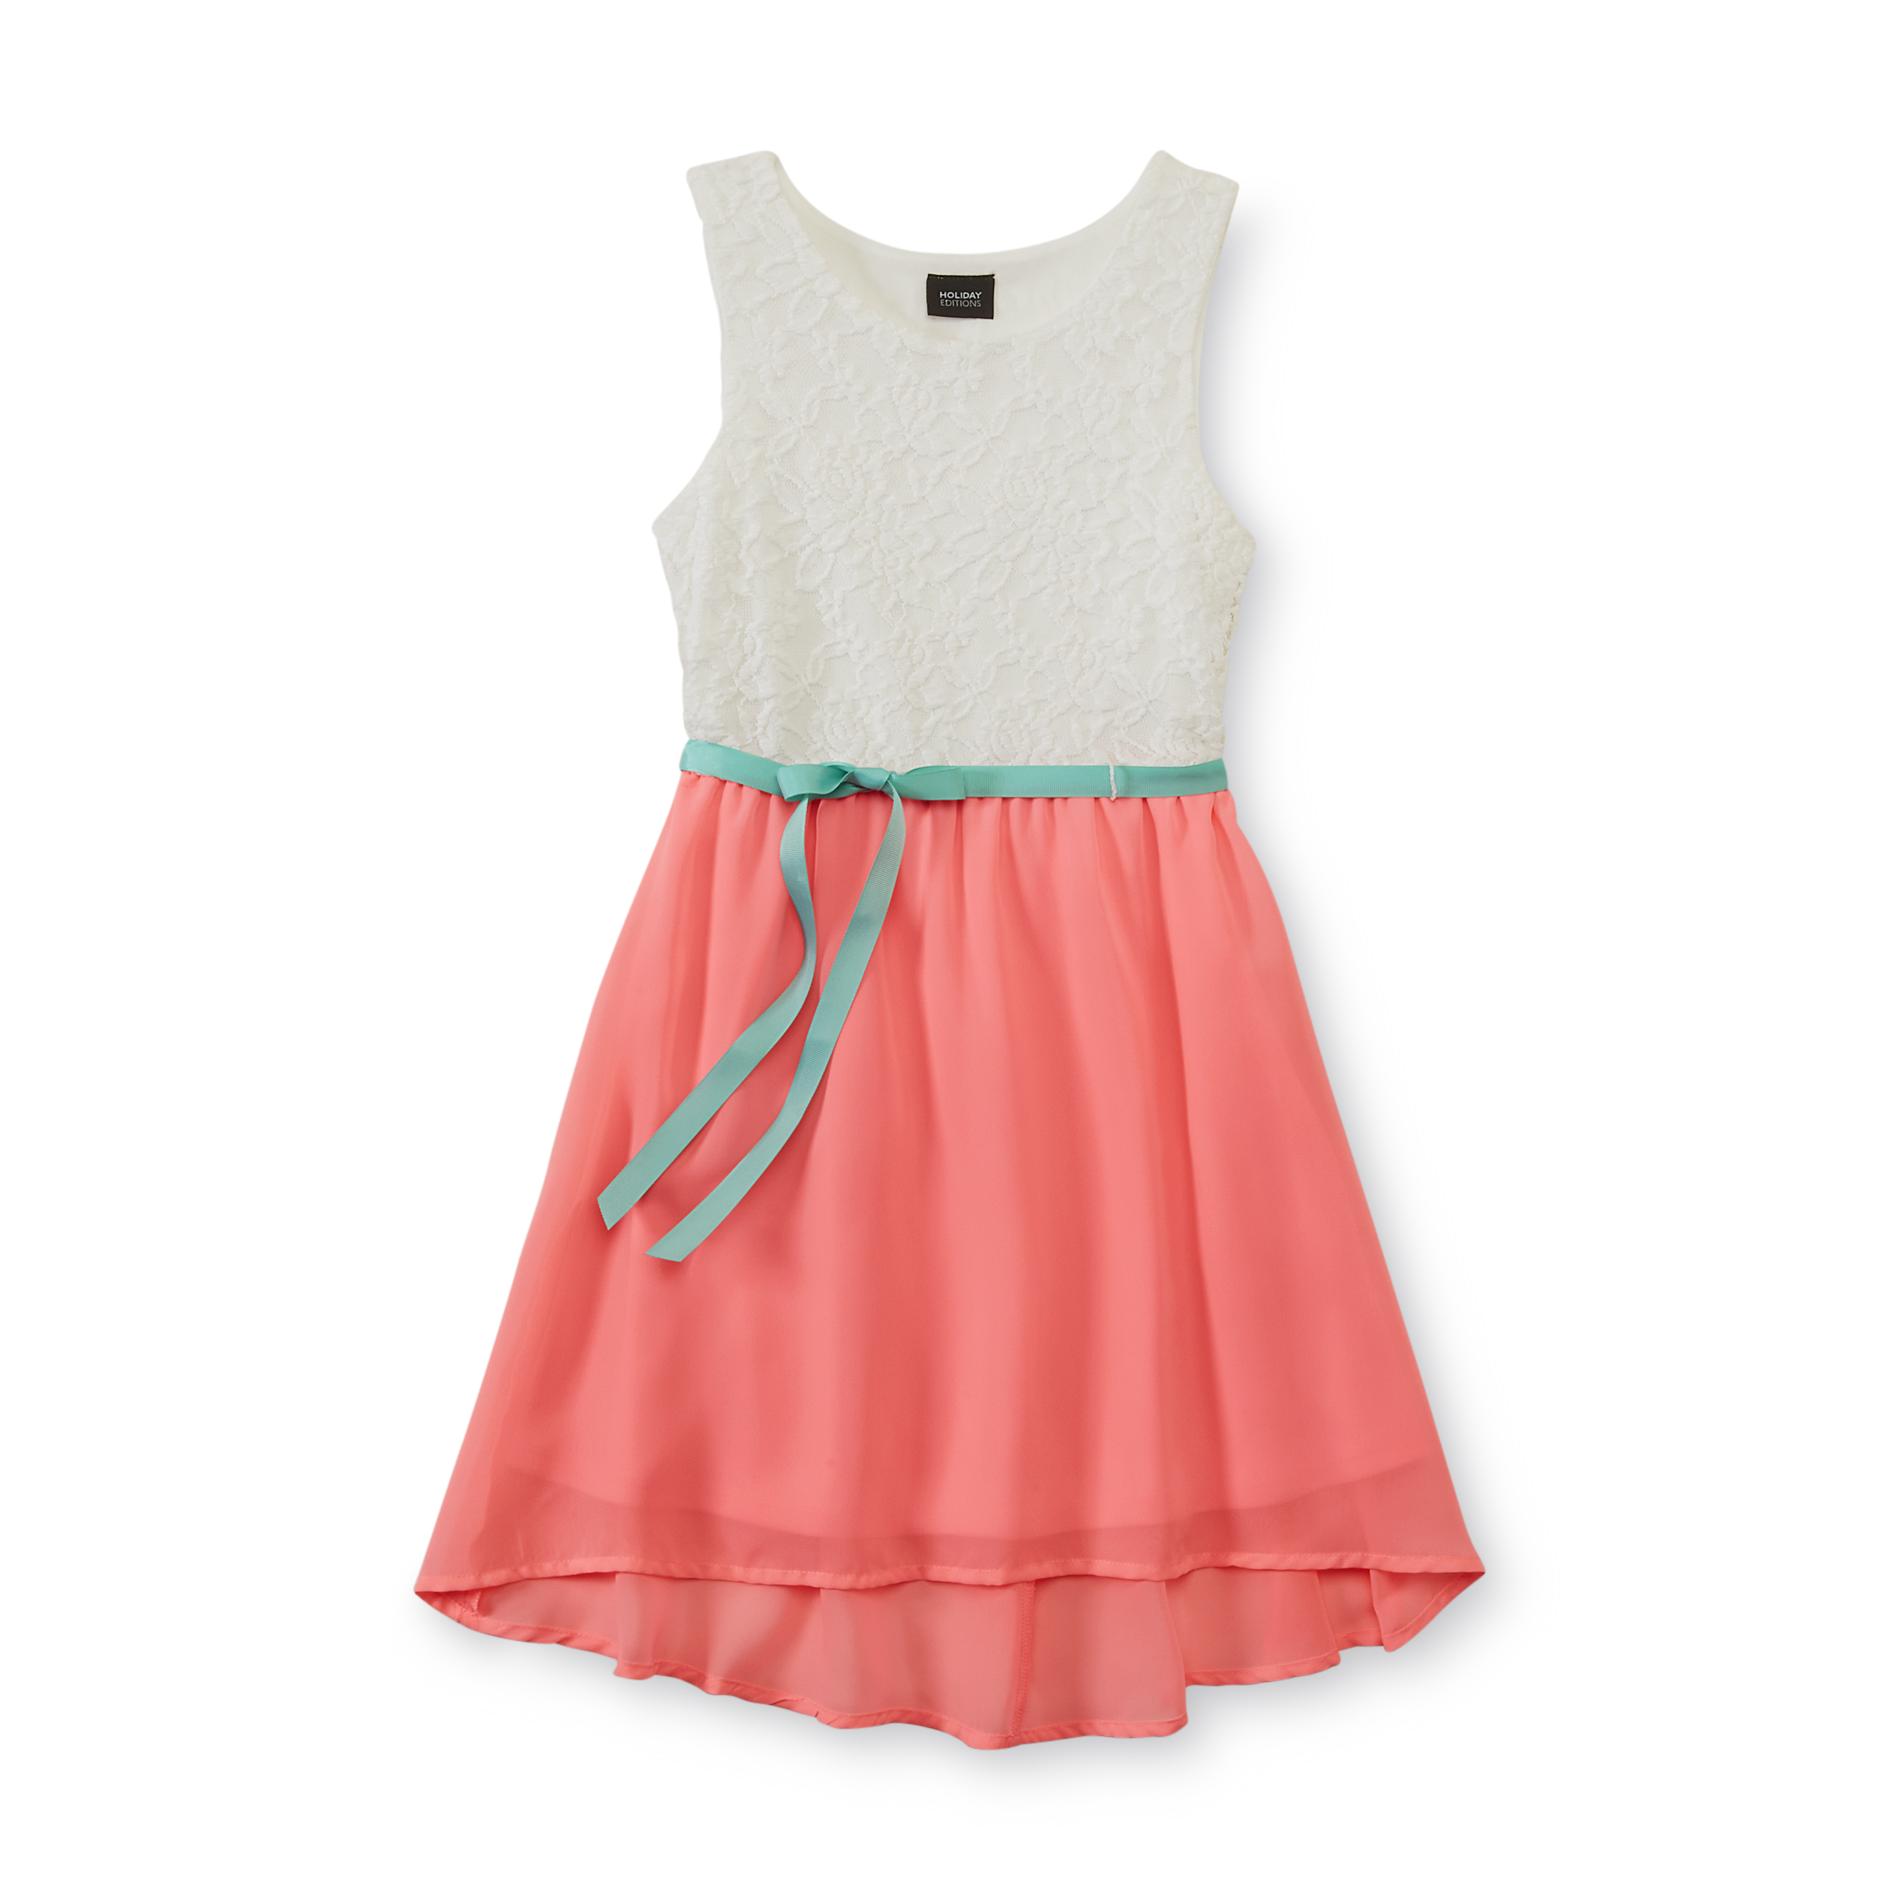 Holiday Editions Girl's Sleeveless Dress - Neon & Lace